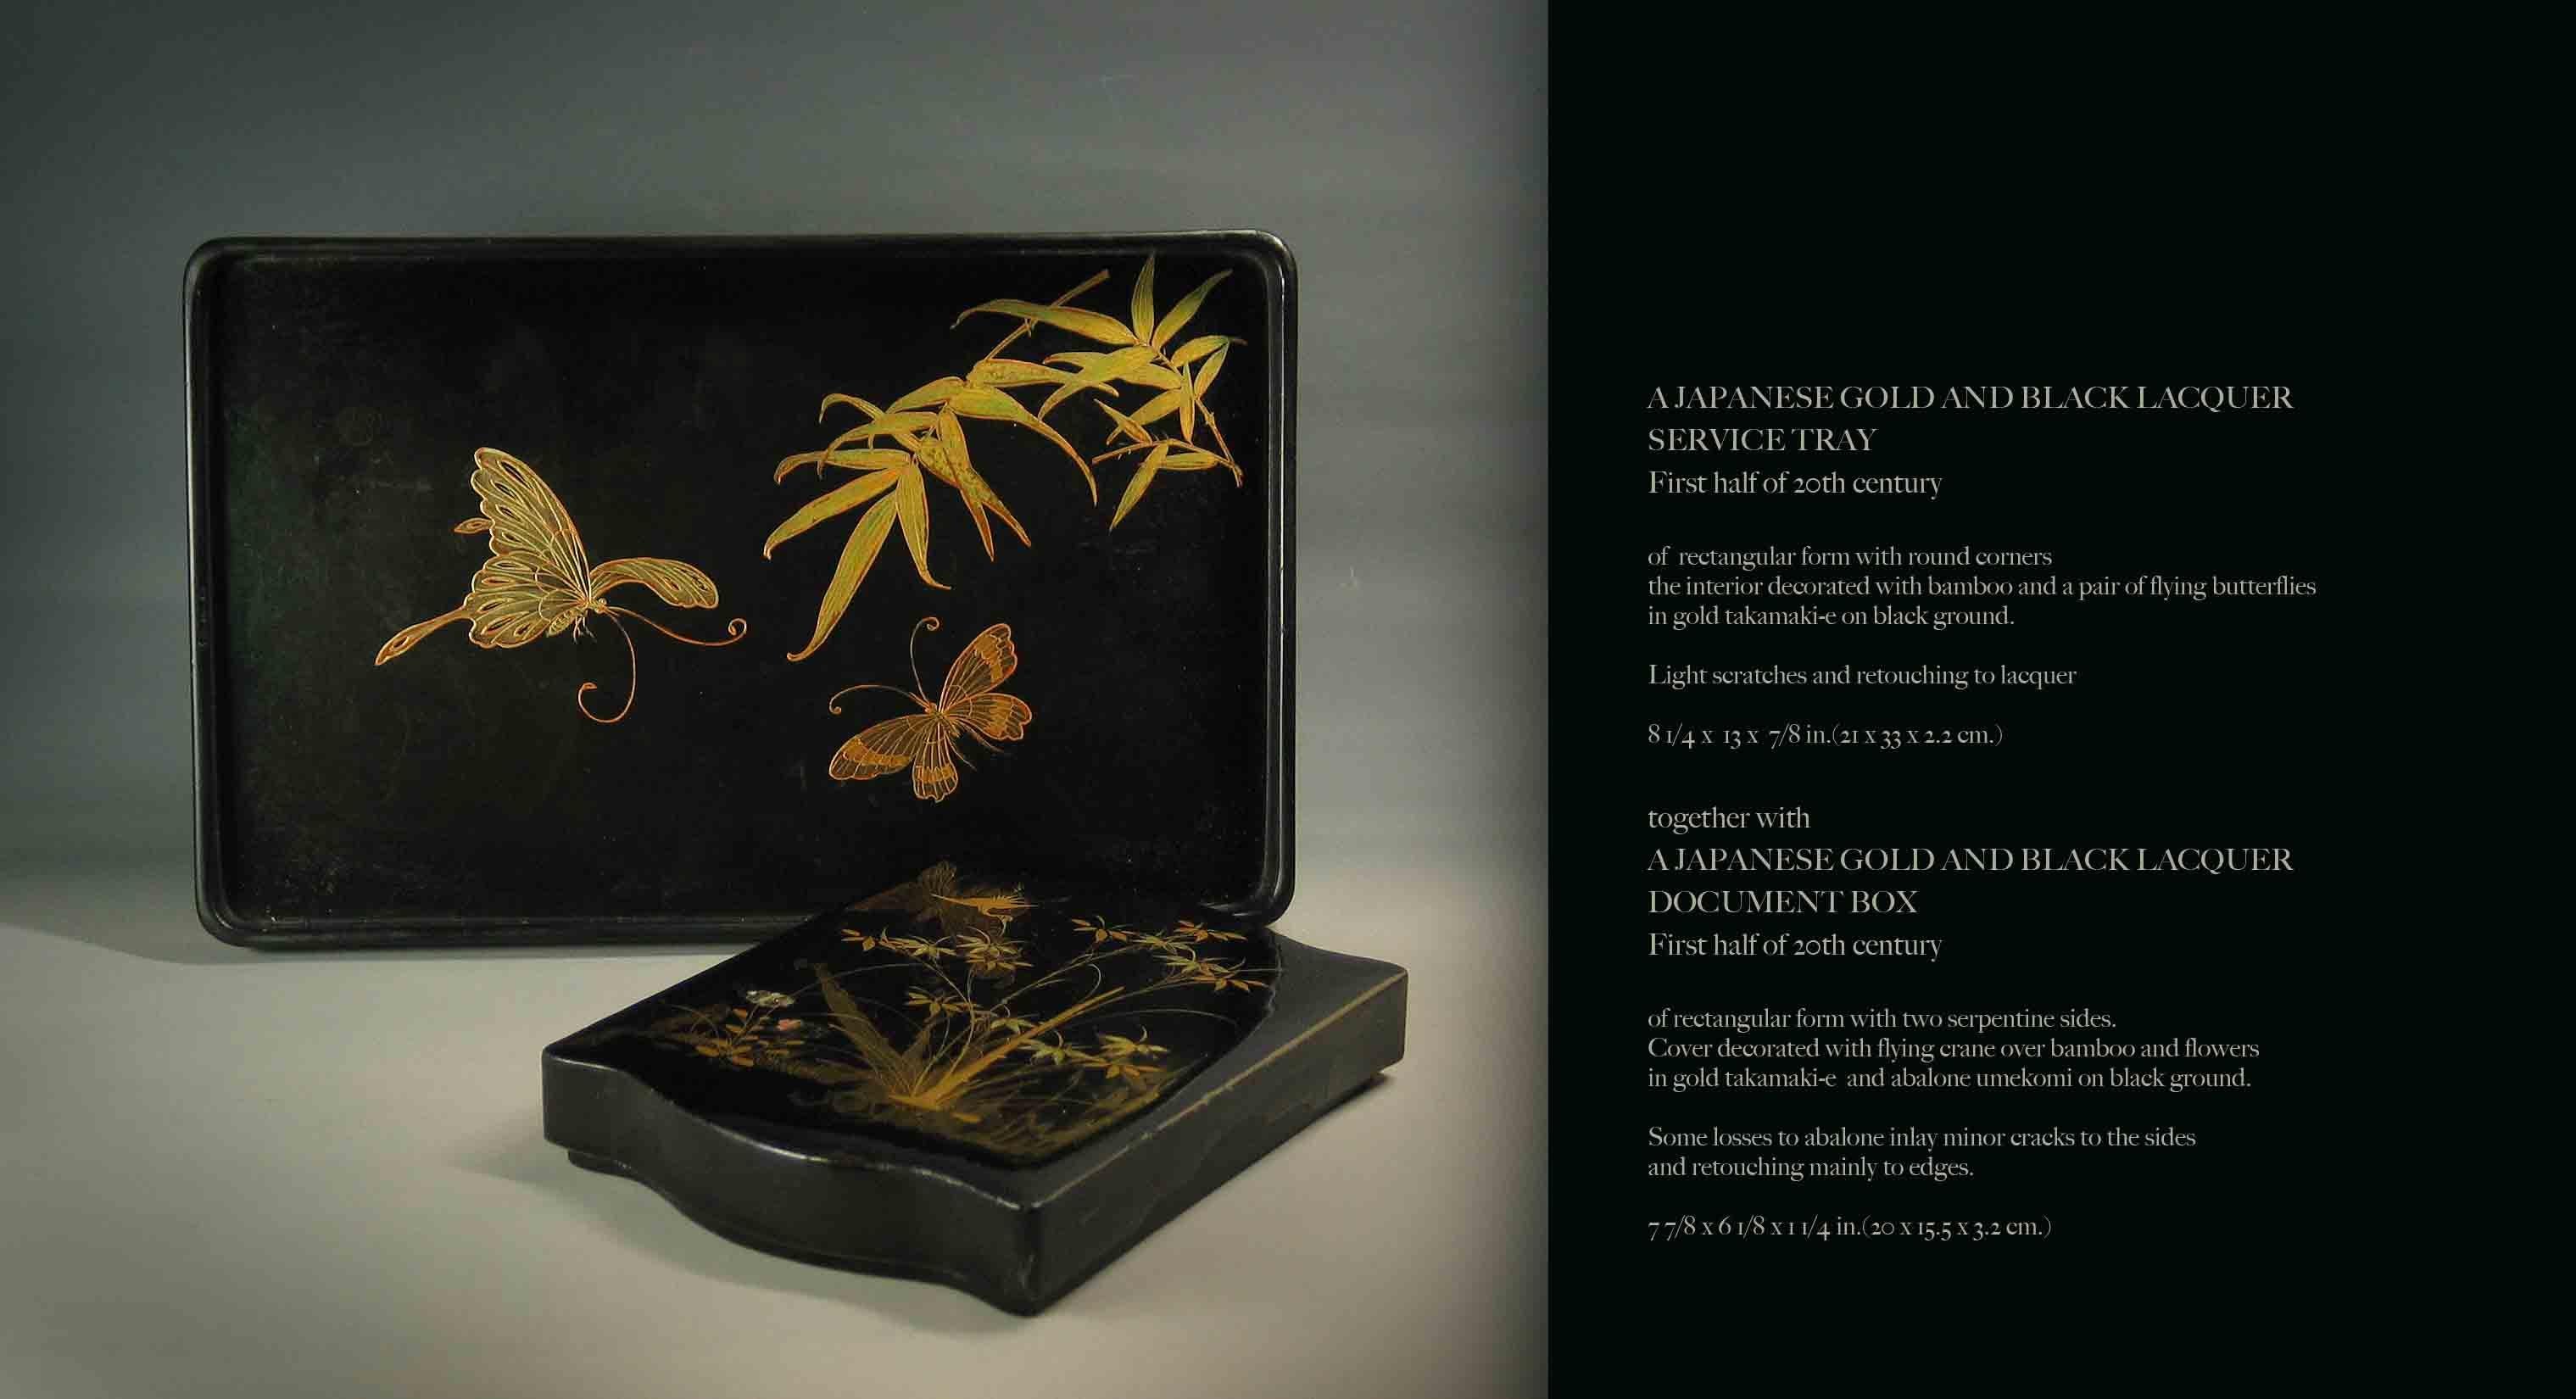 A Japanese gold and black lacquer service tray and lacquer document box,
Both first half of the 20th century, The tray is of rectangular form with round corners, the interior is decorated with bamboo and a pair of flying butterflies in gold